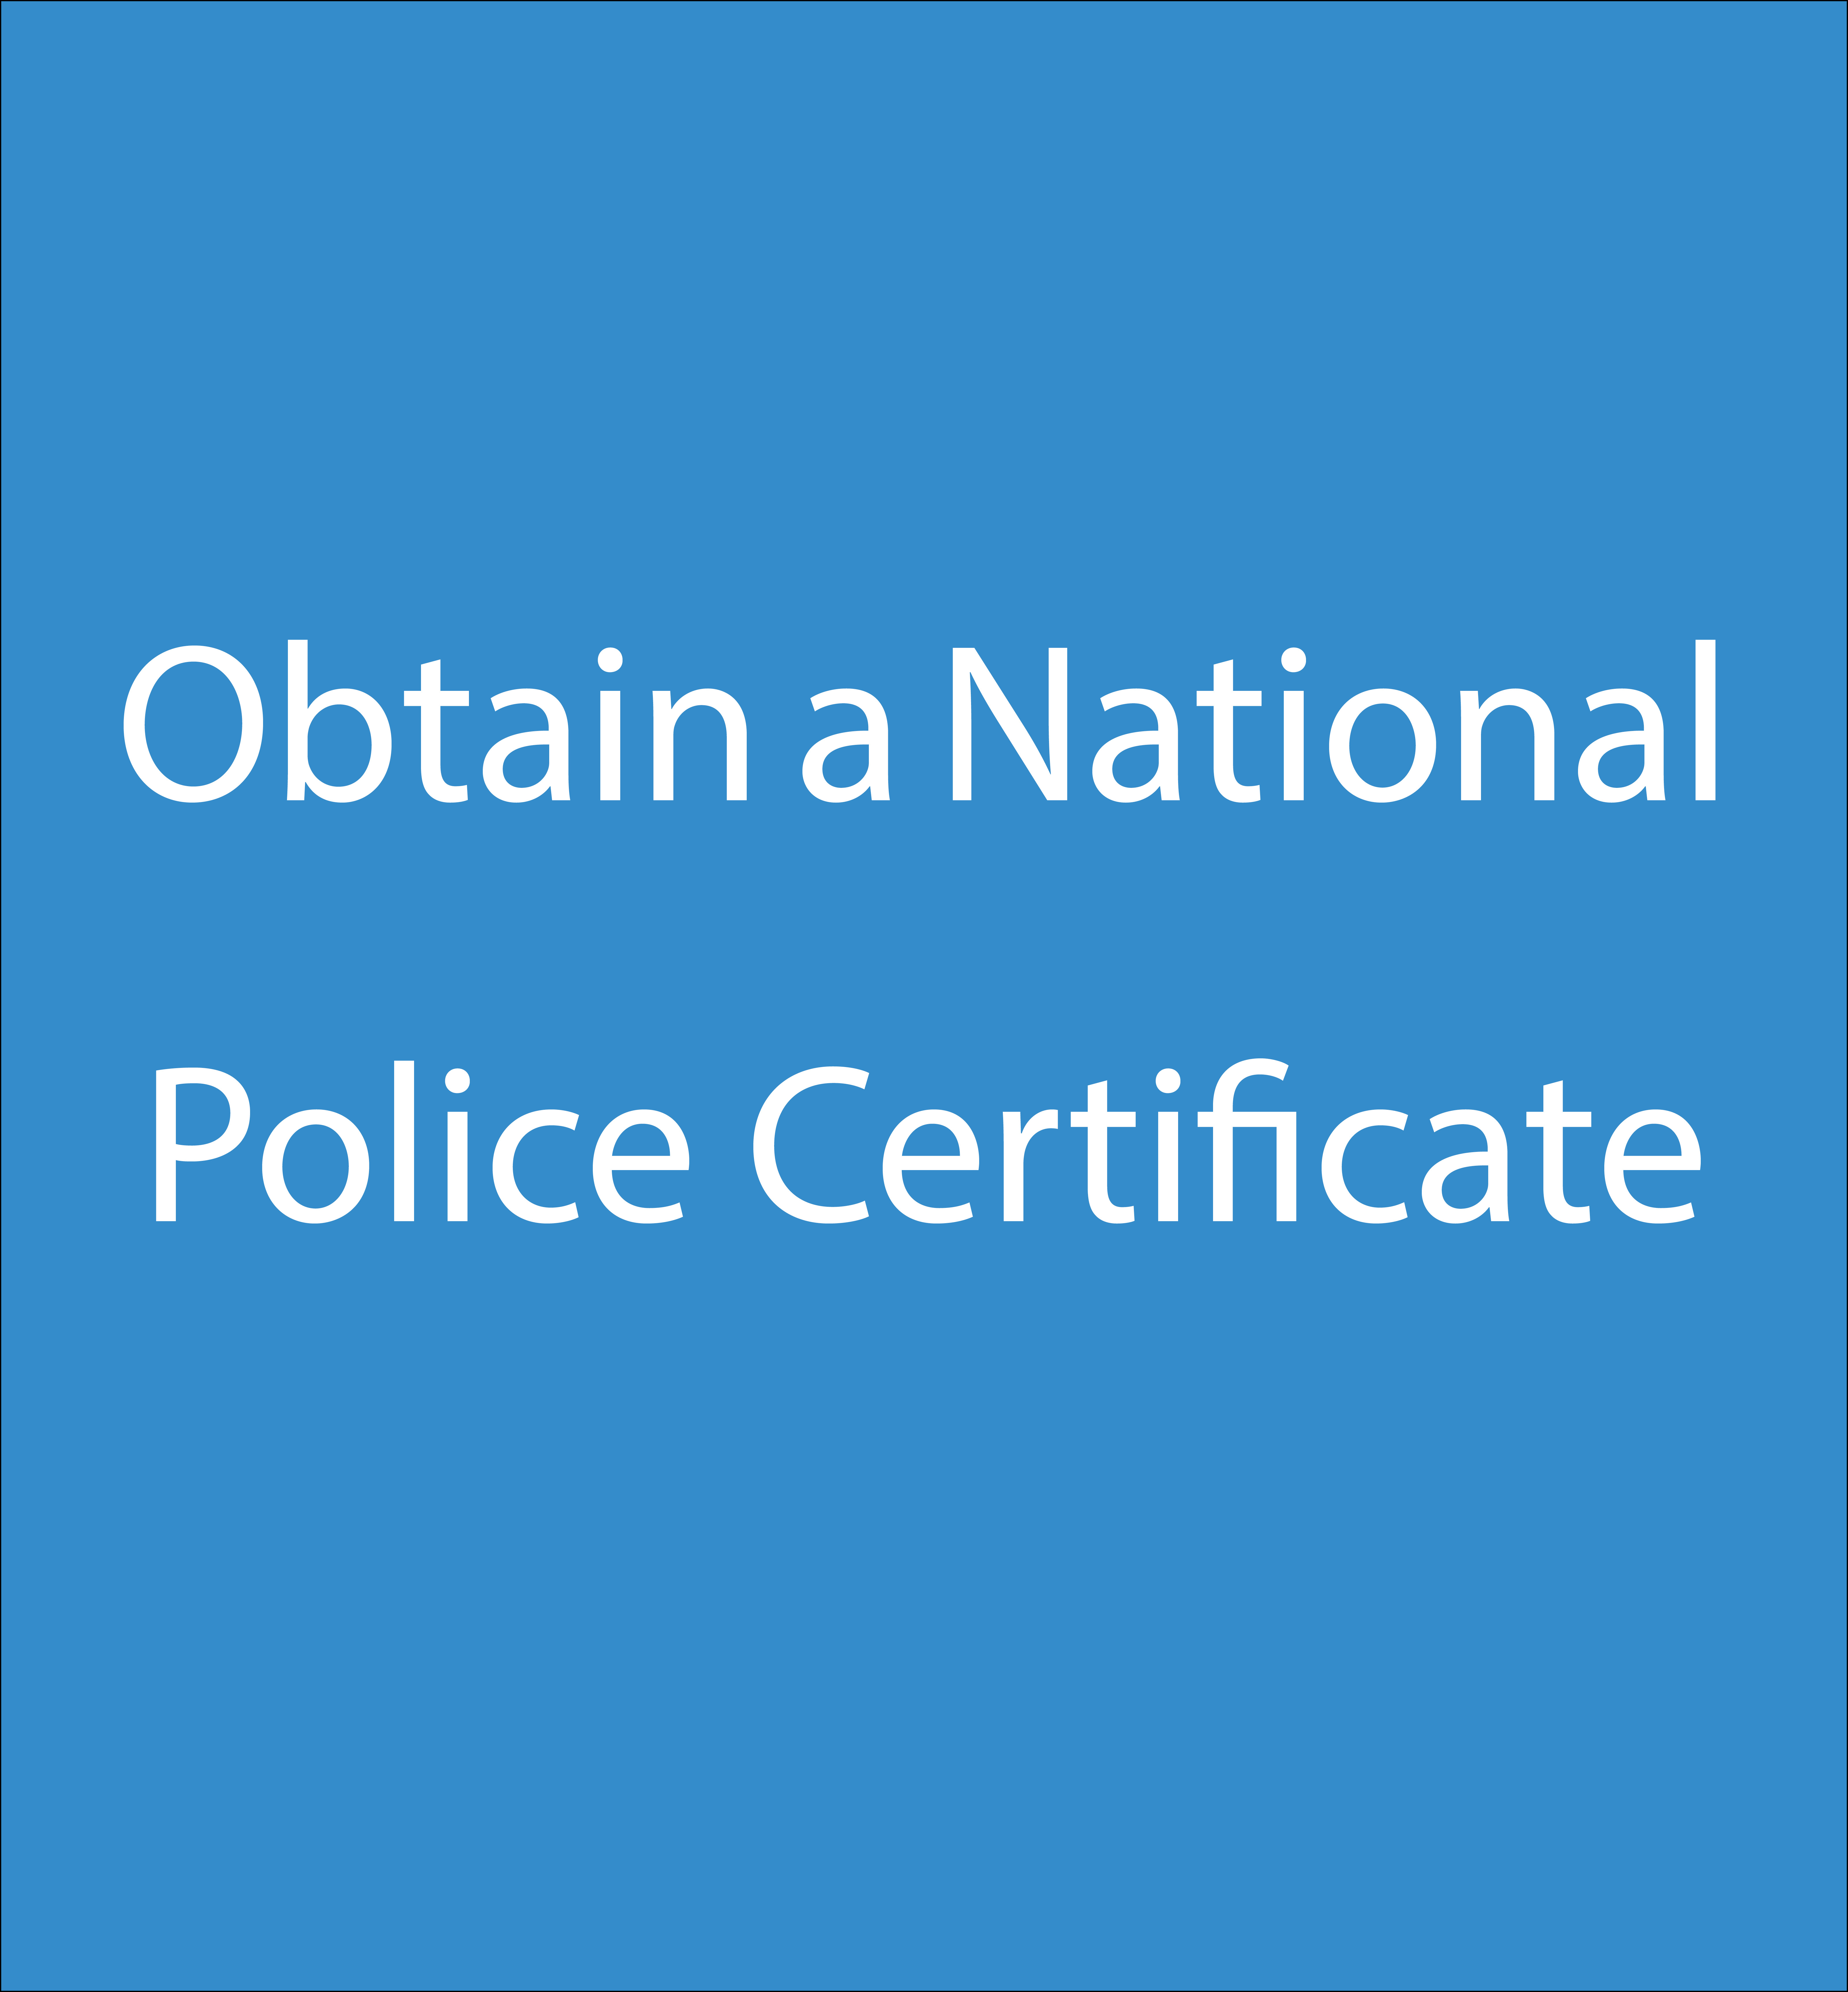 Obtain a National Police Certificate